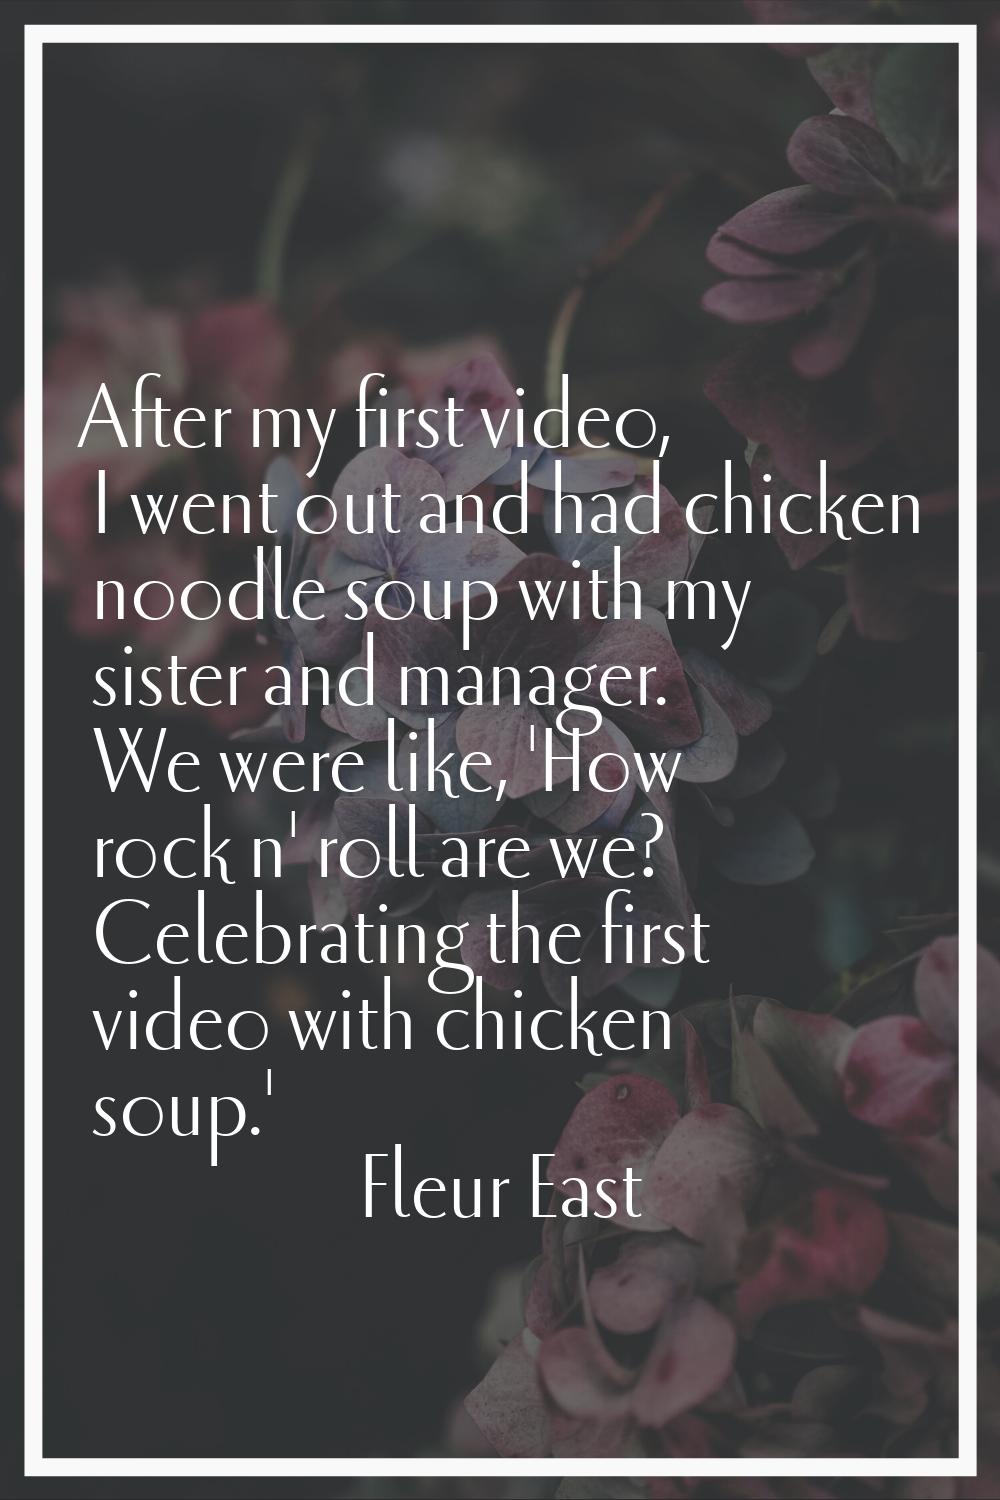 After my first video, I went out and had chicken noodle soup with my sister and manager. We were li